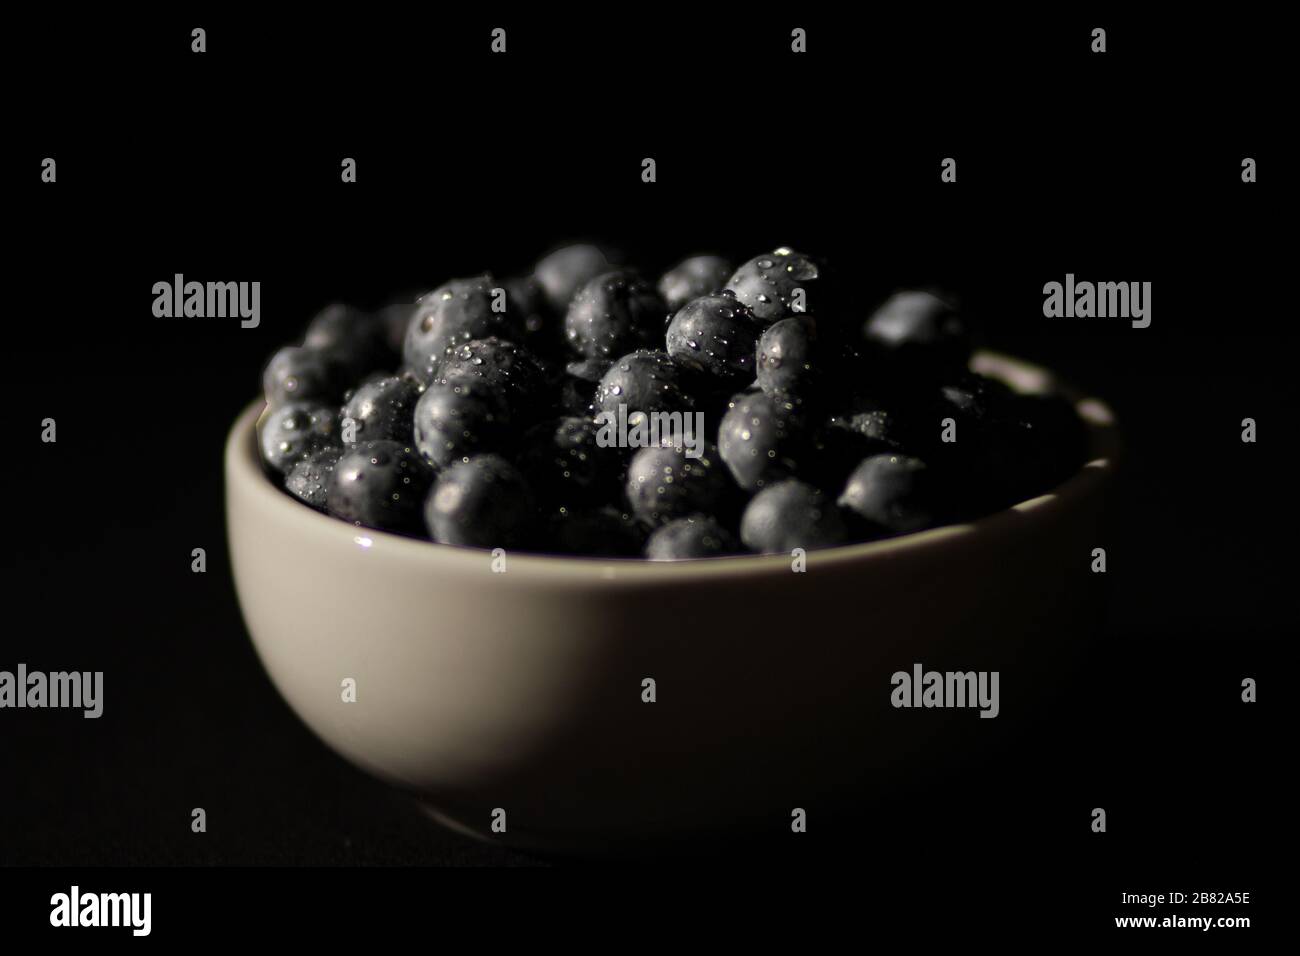 High Contrast bowl of blueberries Stock Photo